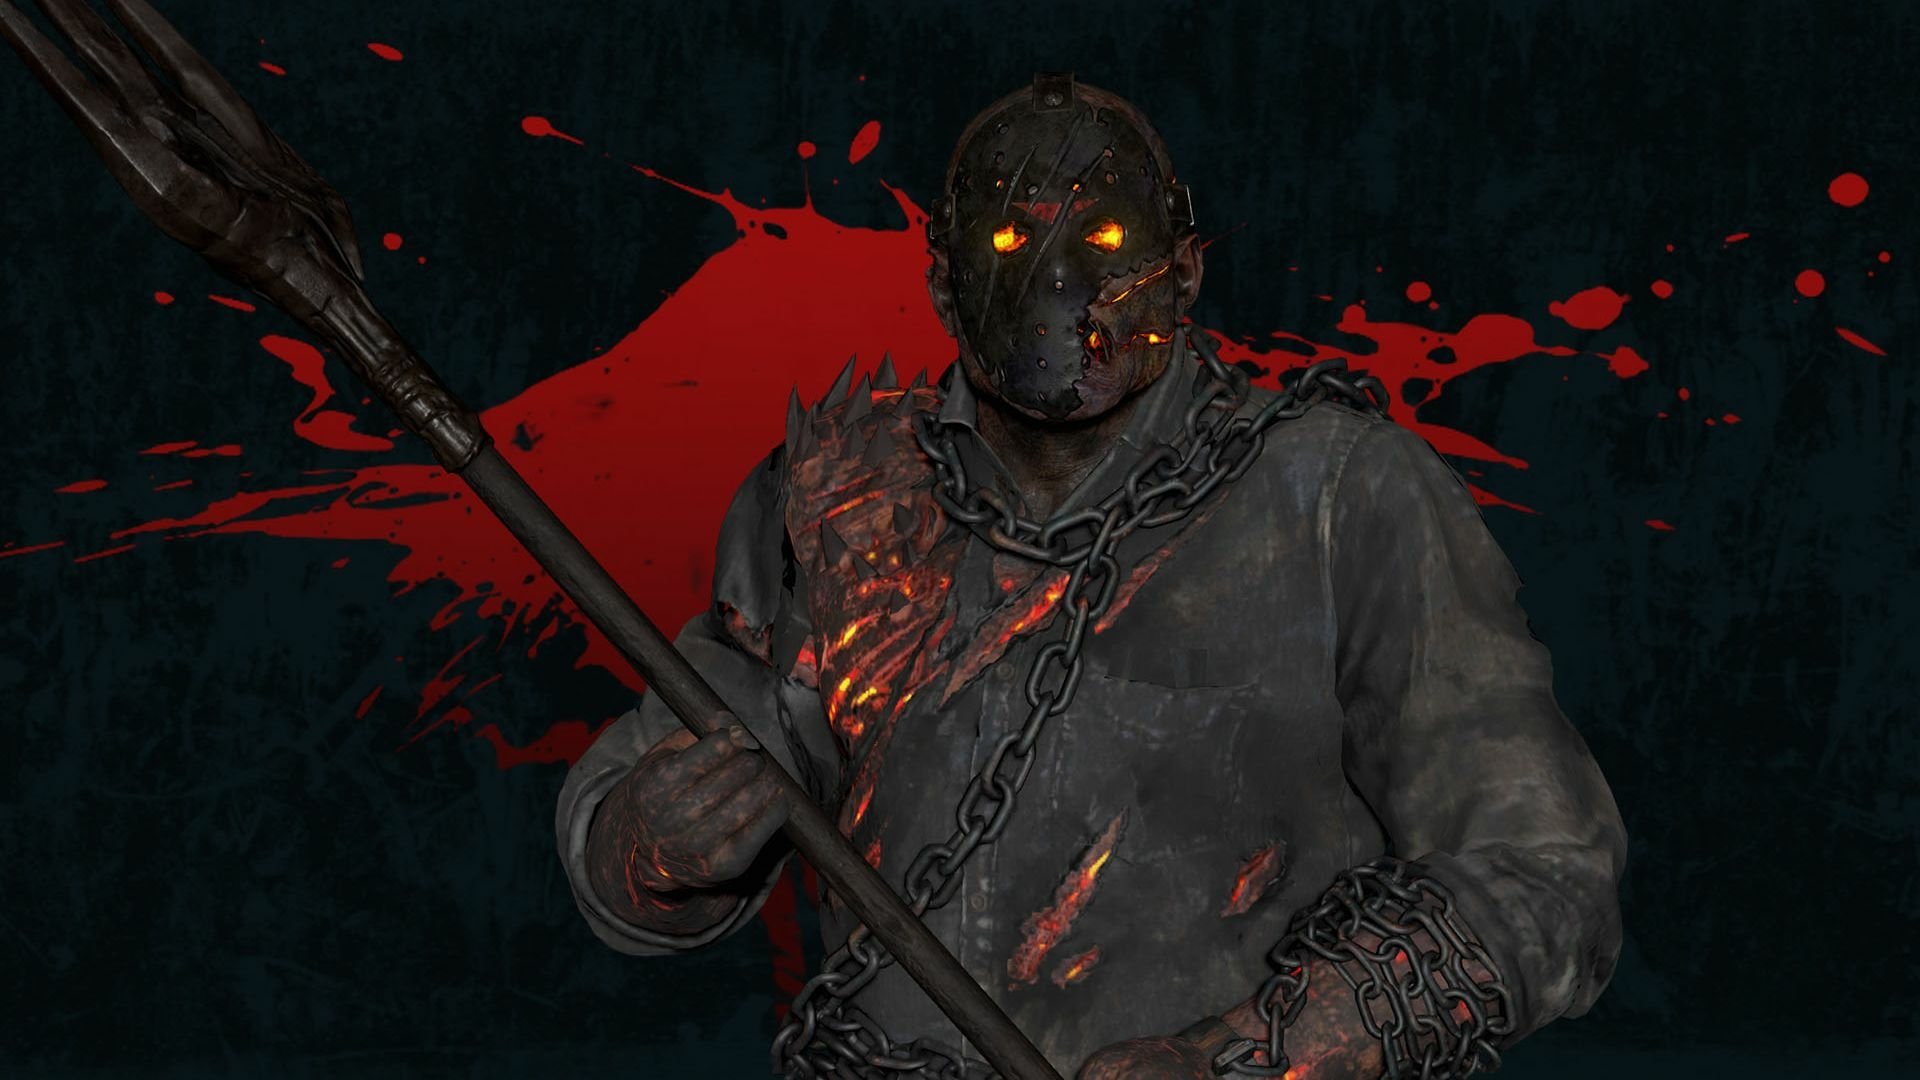 1920x1080 Friday The 13th: The Game Wallpaper Background Image. 